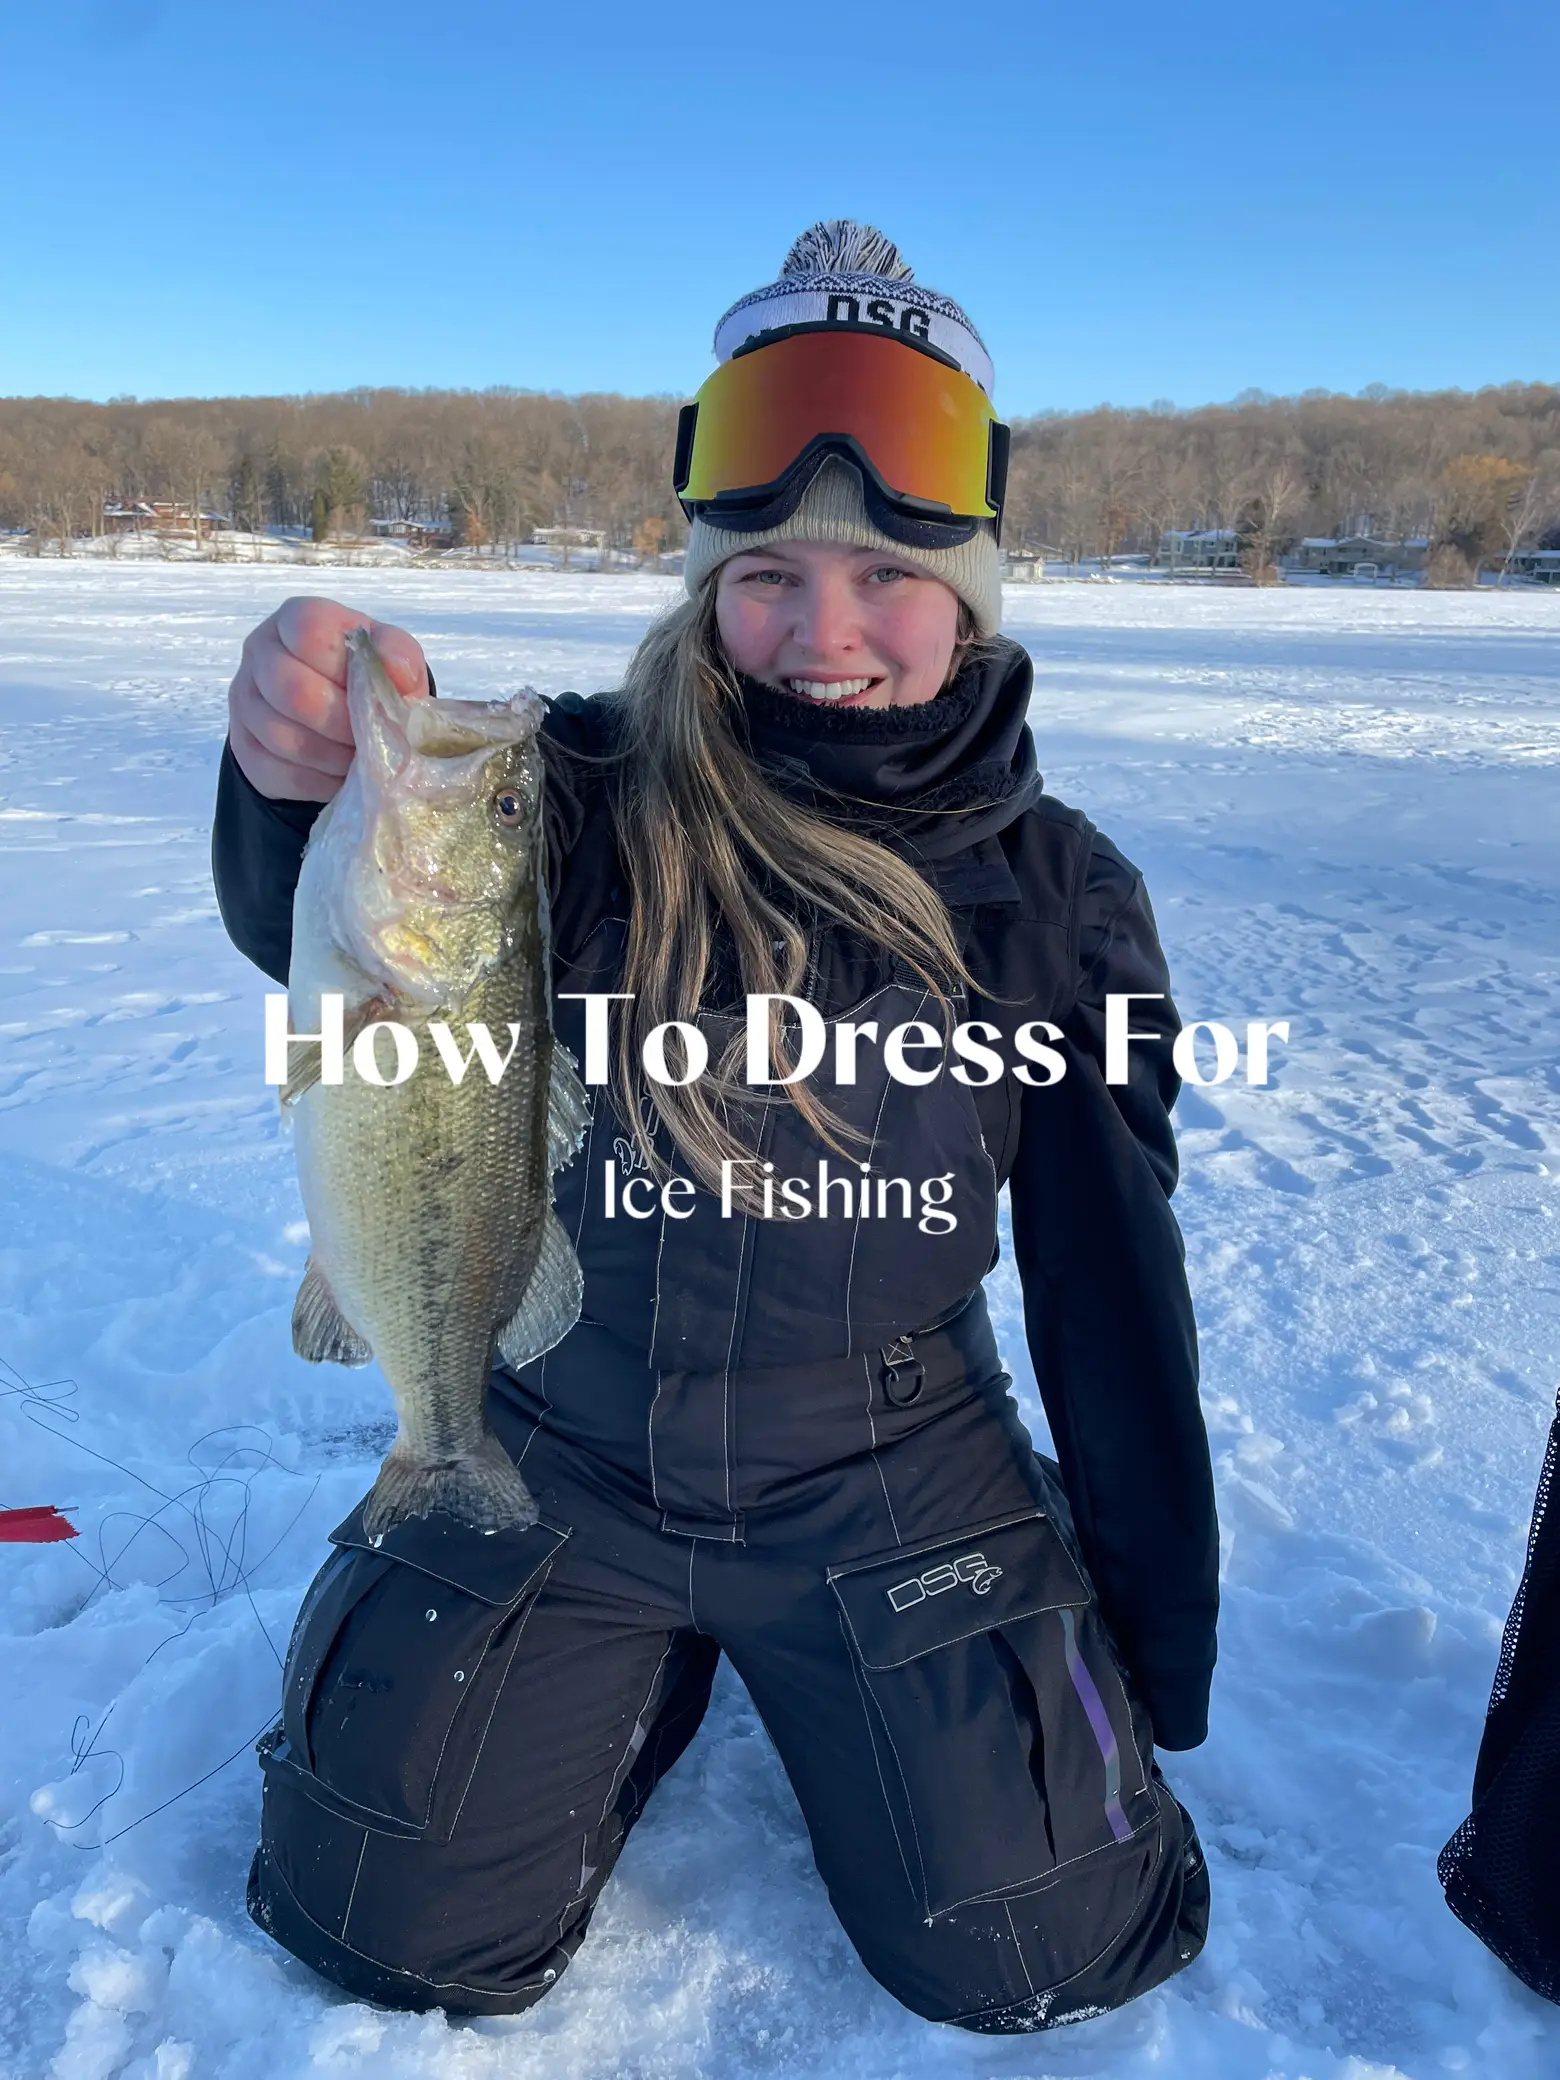 Dress For The Occassion! 🙅‍♀️🥶